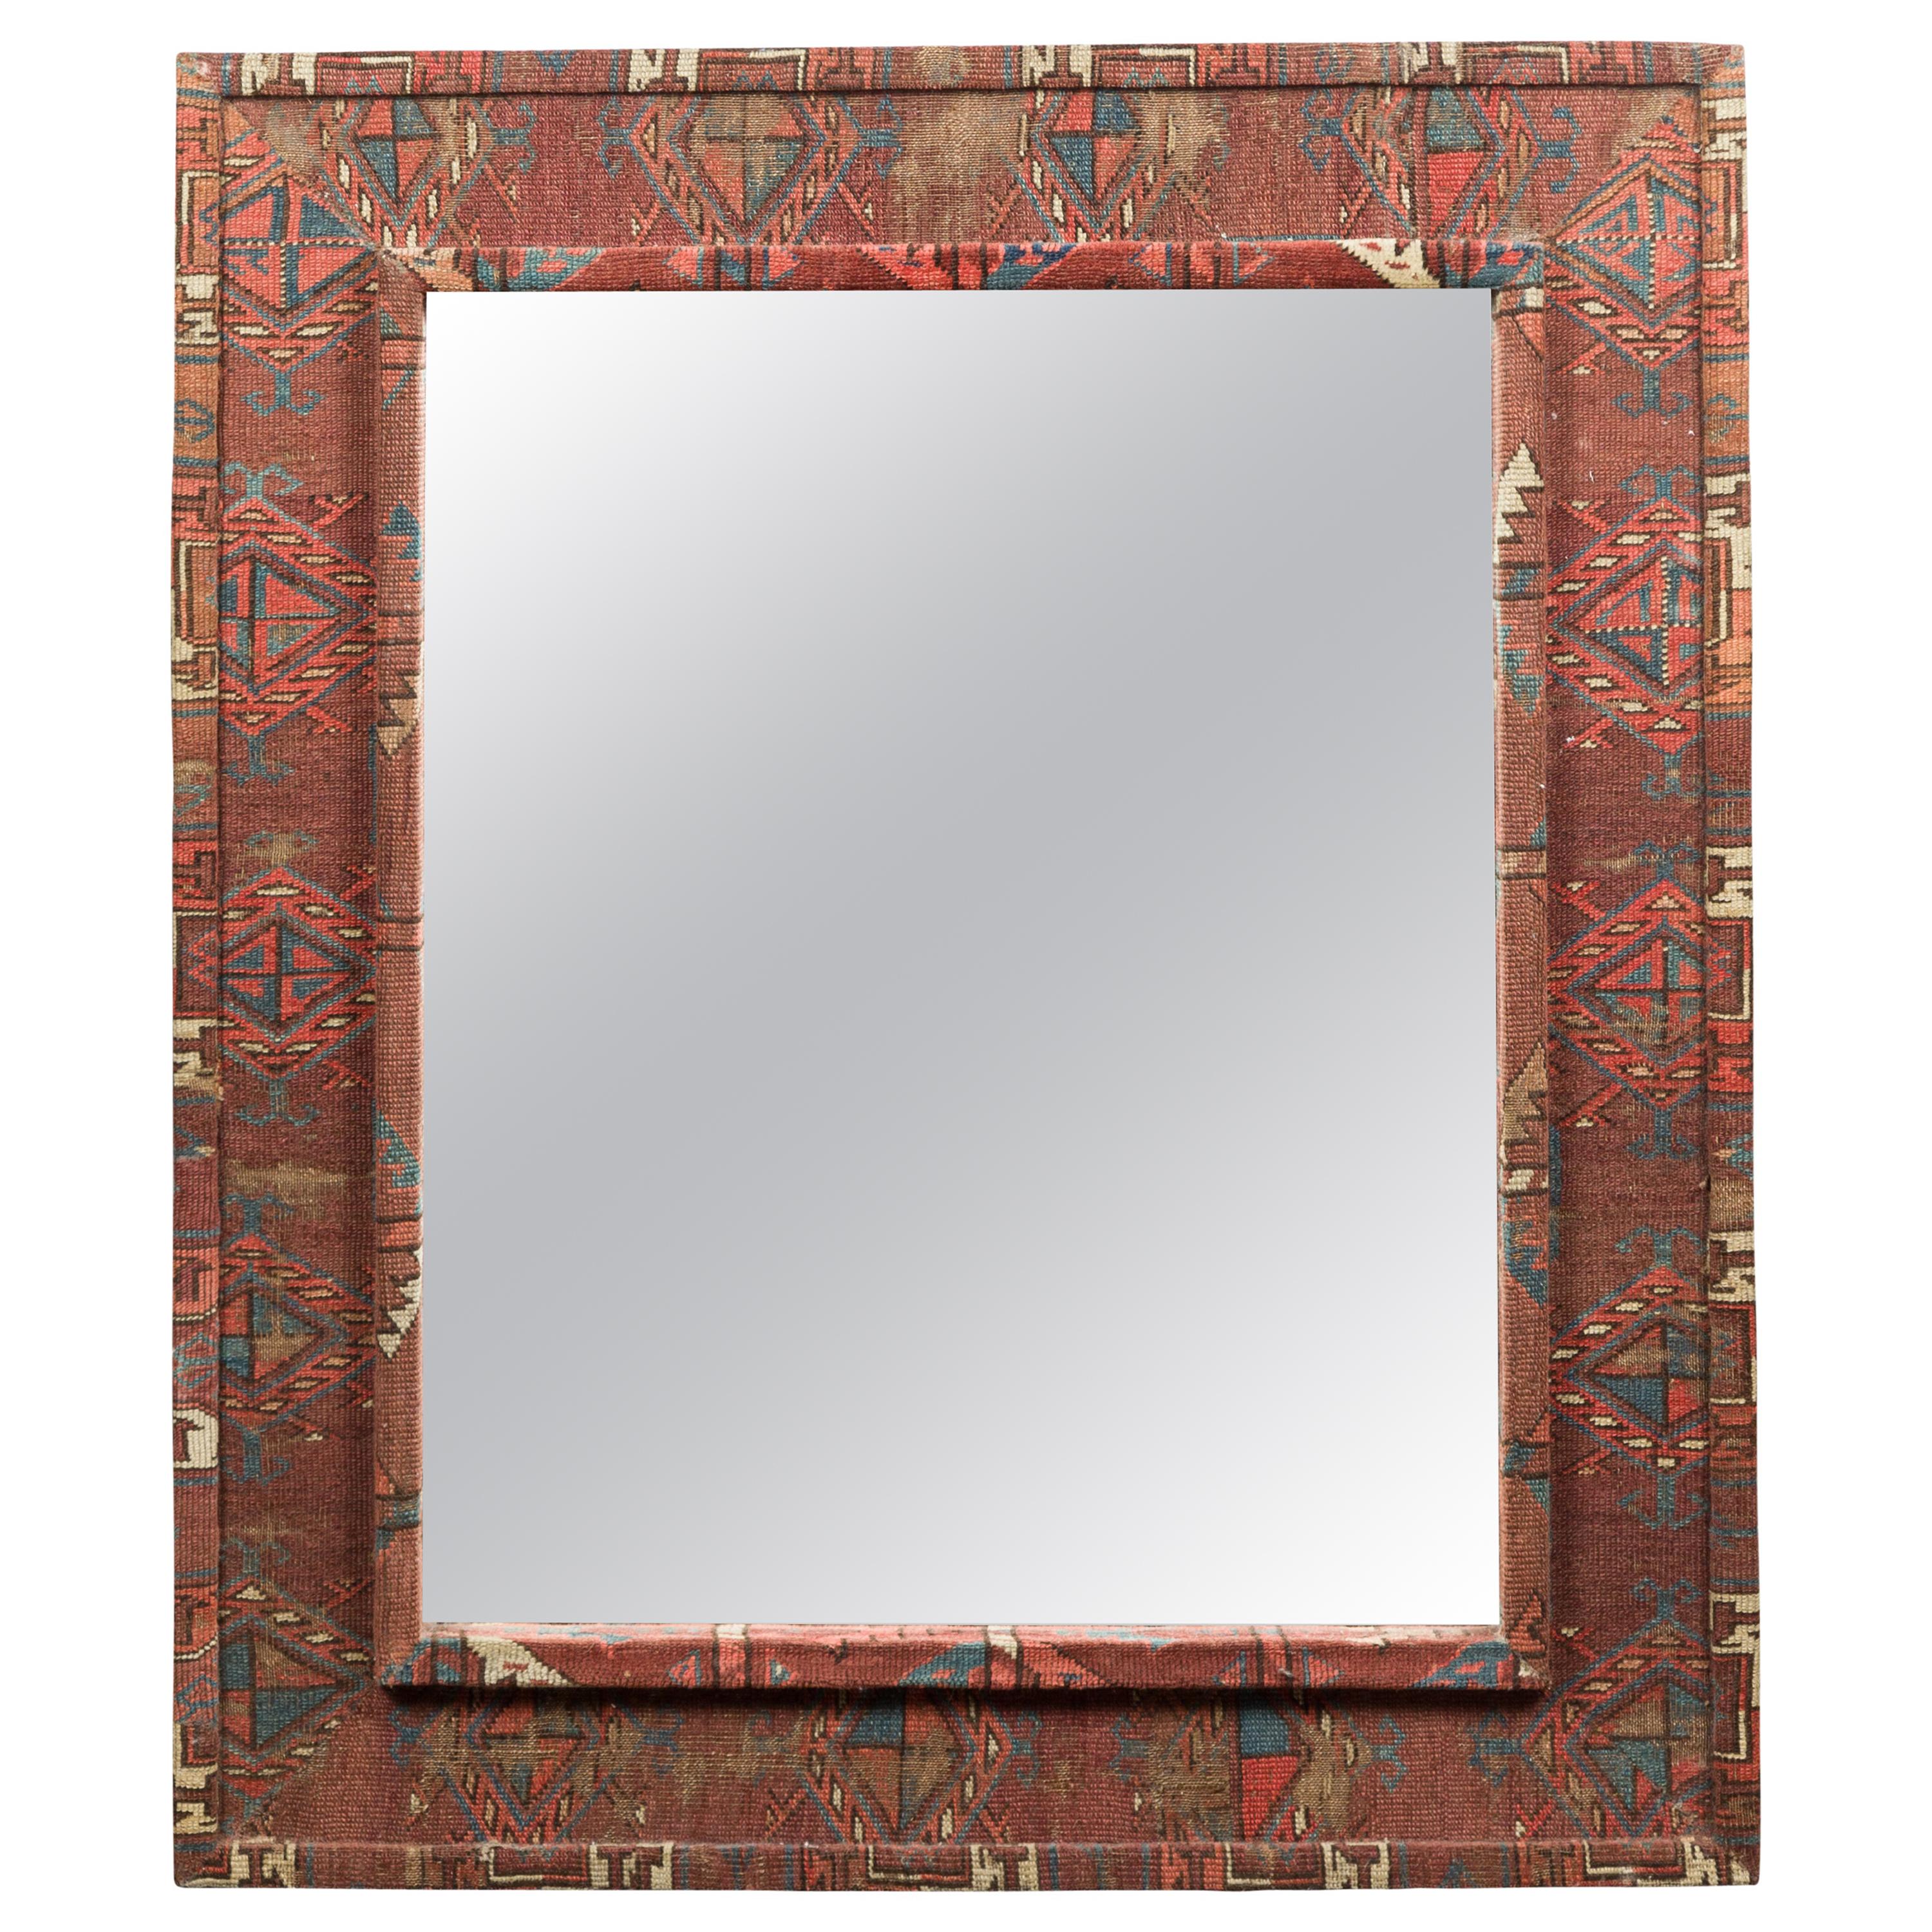 Vintage Kilim Covered Red, Blue and Beige Rectangular Mirror with Beveled Glass